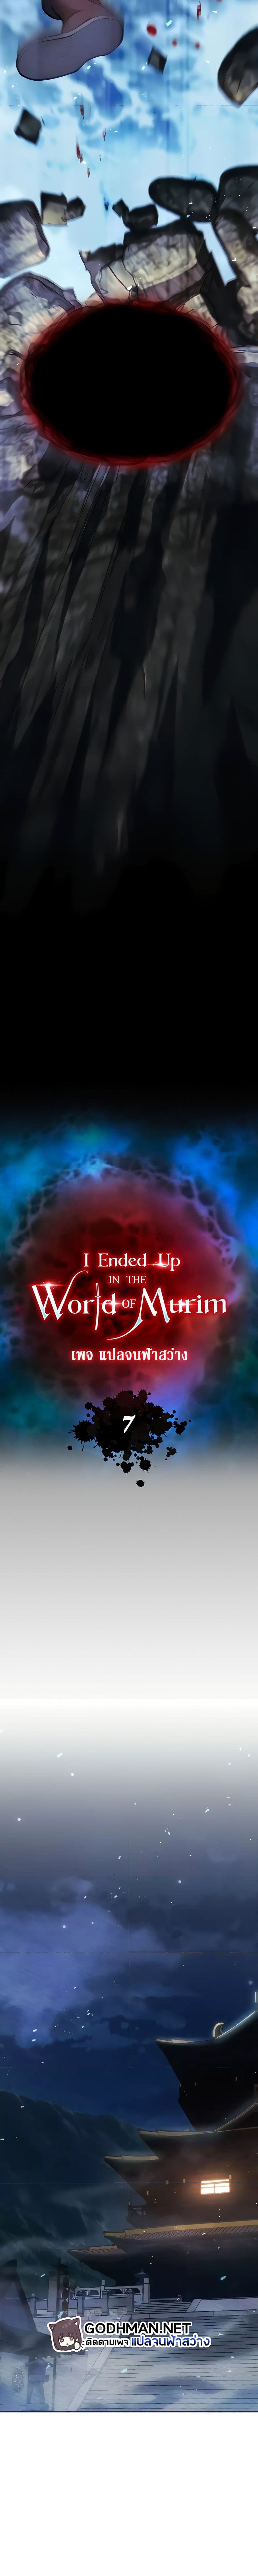 I Ended Up in the World of Murim ตอนที่ 7 ภาพ 1